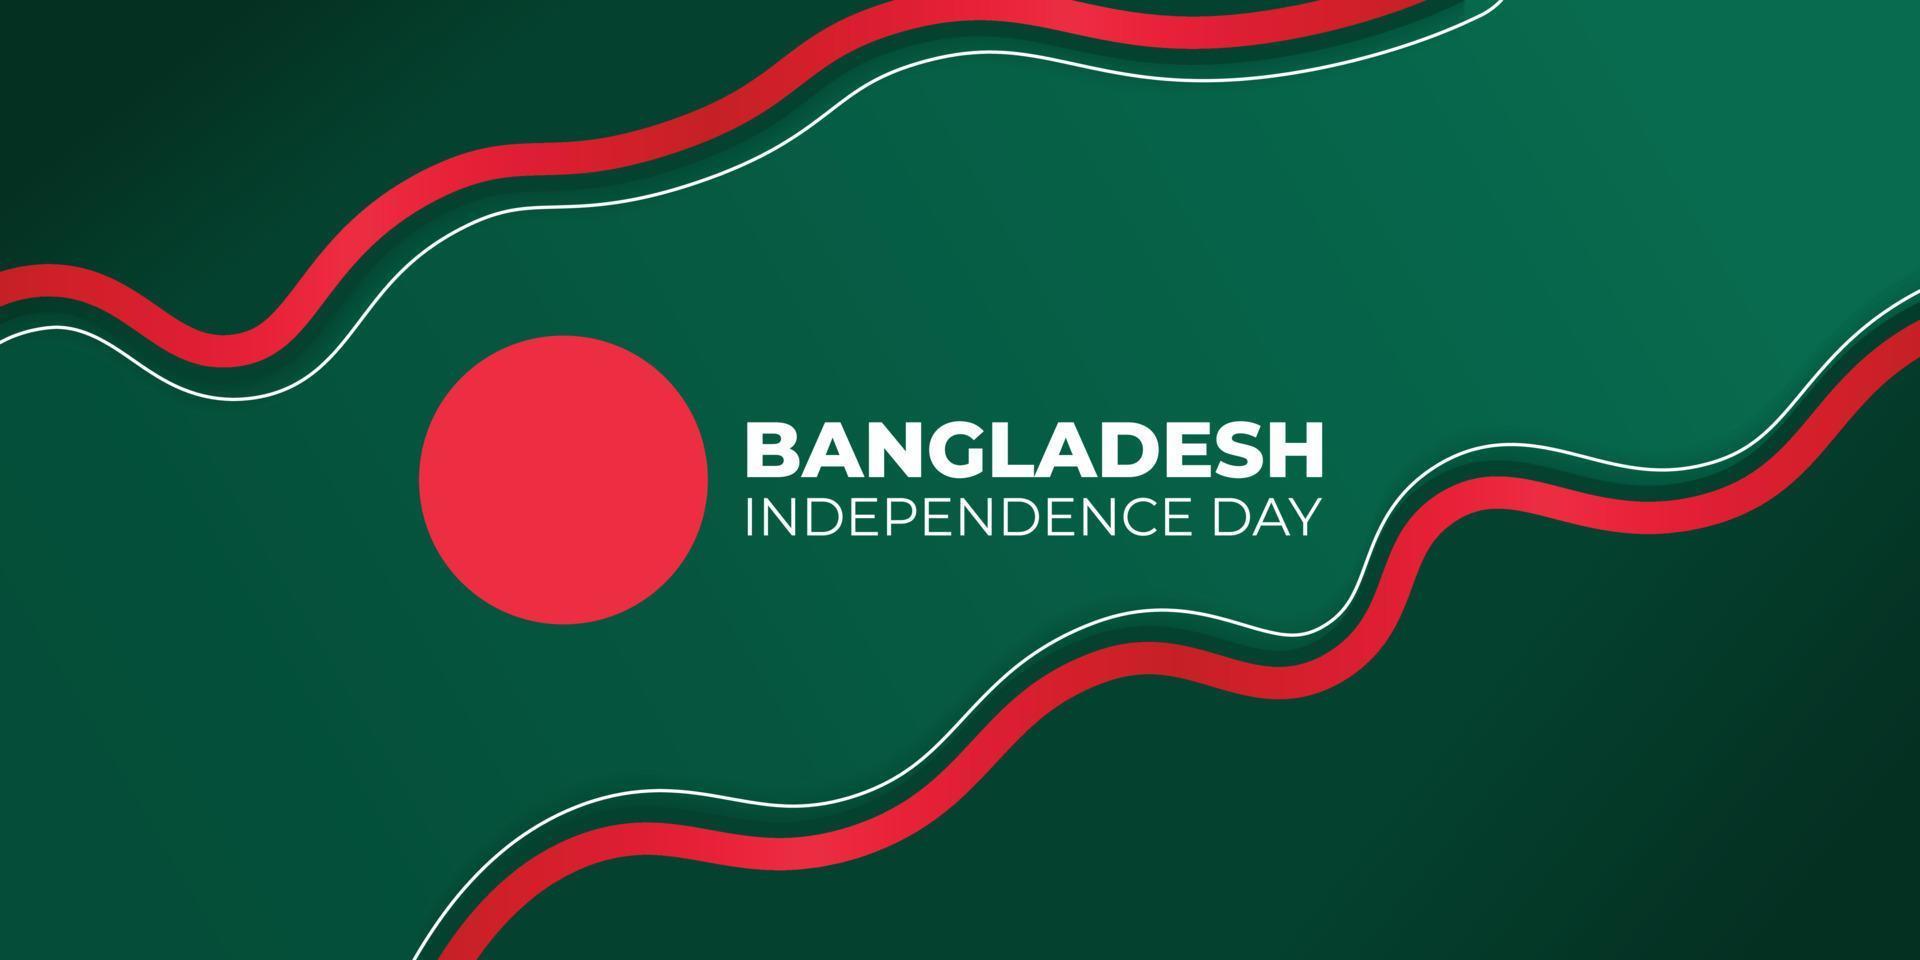 Bangladesh Independence day. green abstract background with red line design. vector